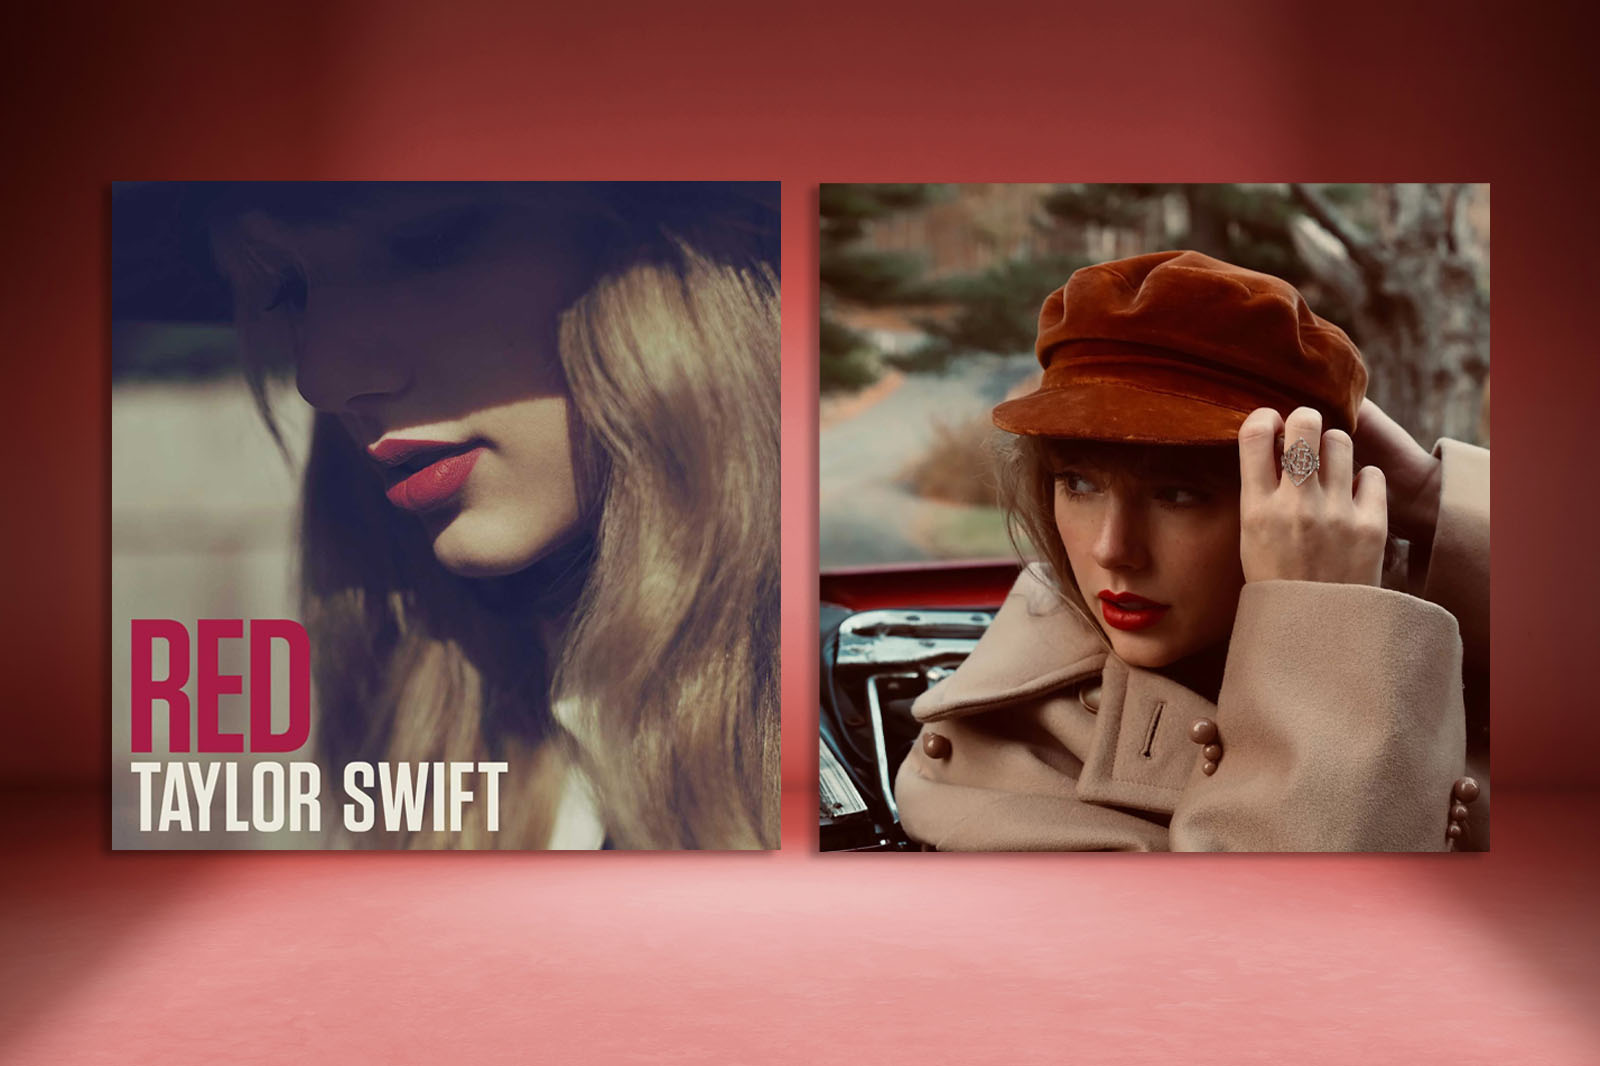 Ranking the Songs on Taylor Swift's Red Album